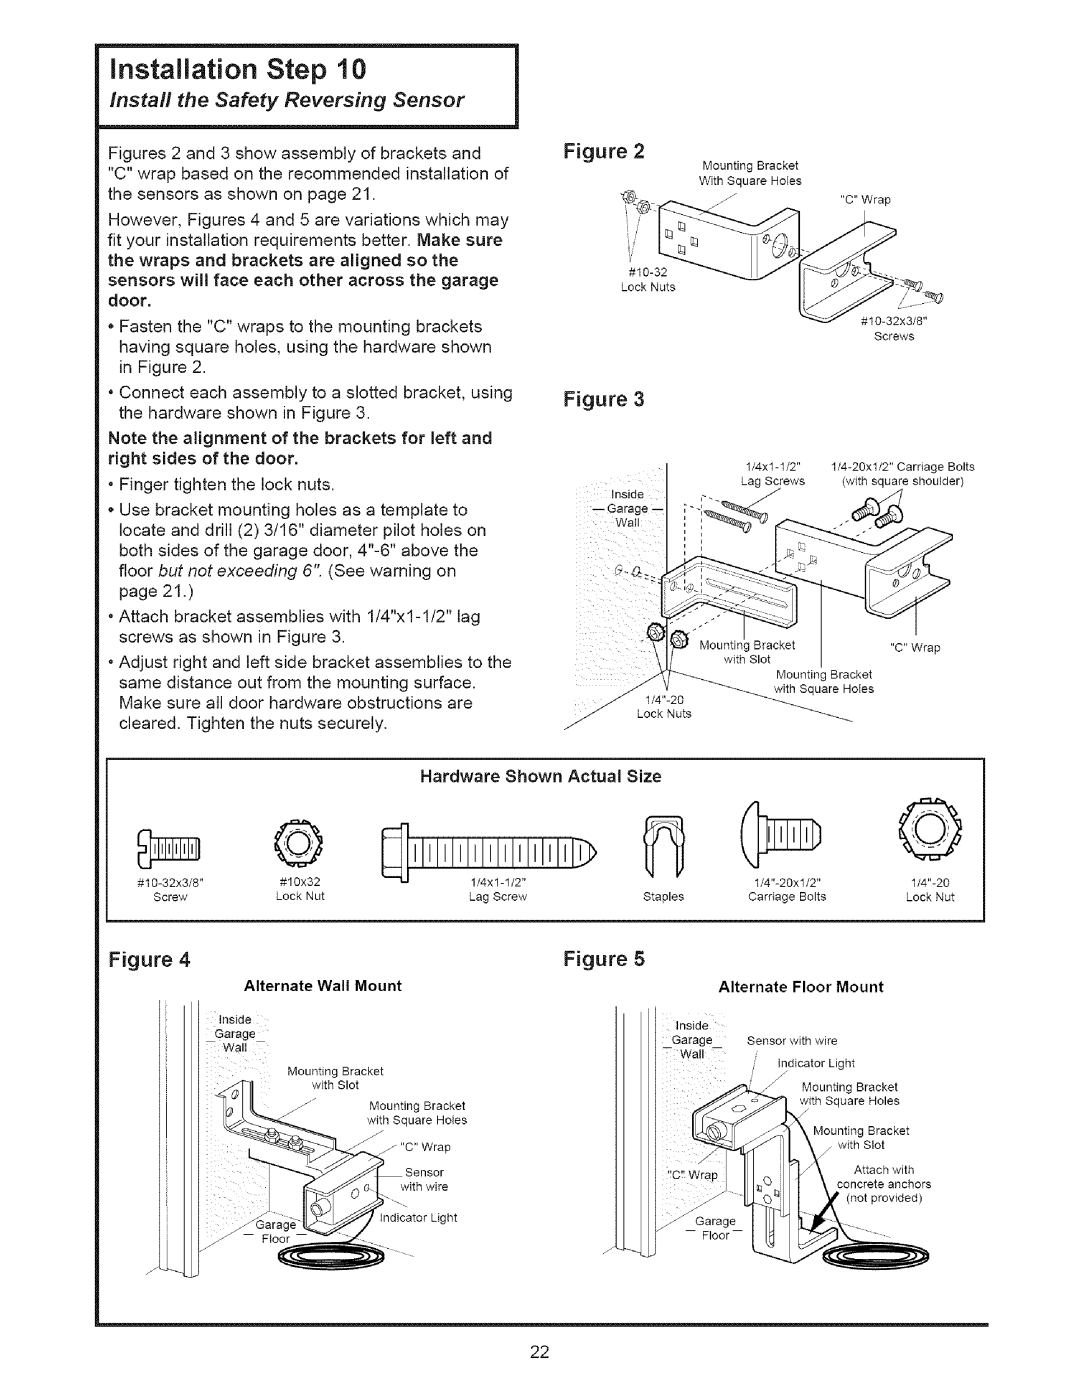 Sears 139.53535SRT1 operating instructions install the Safety Reversing Sensor, Actual Size, installation Step 